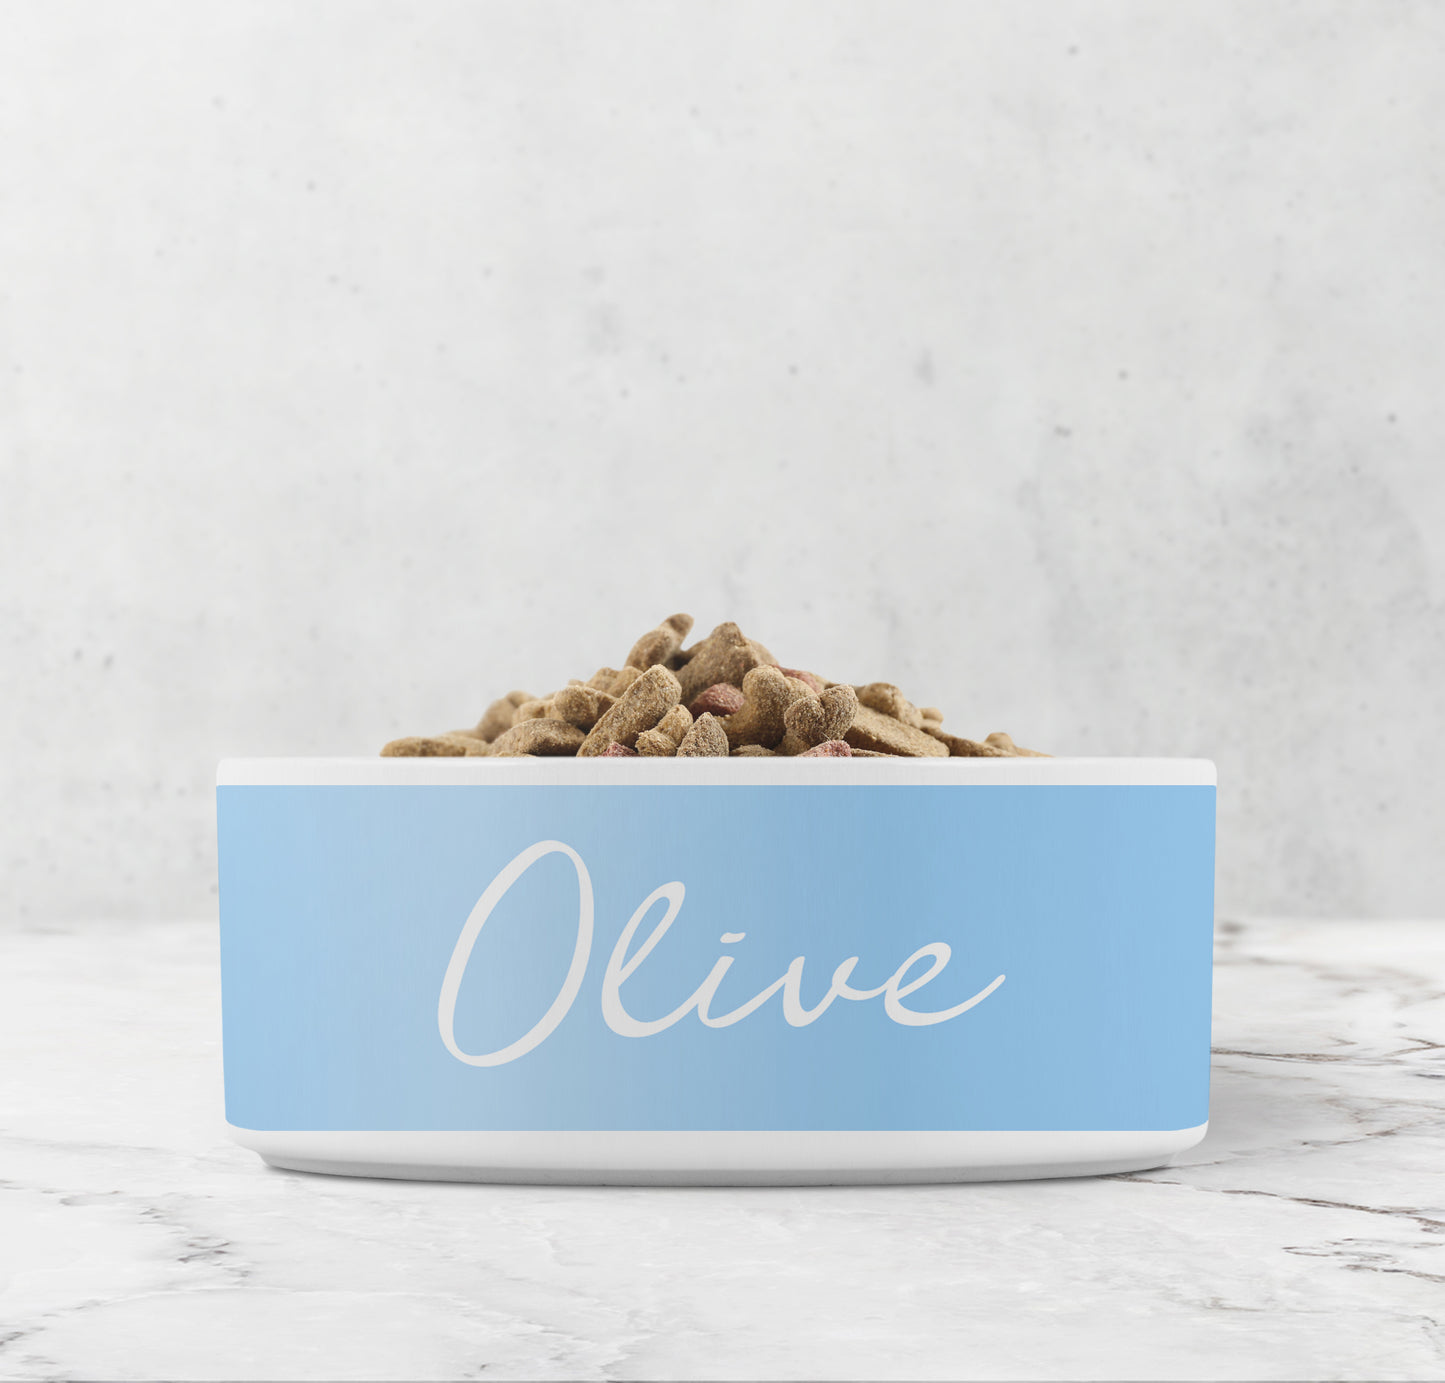 Personalized dog bowl in baby blue and white.